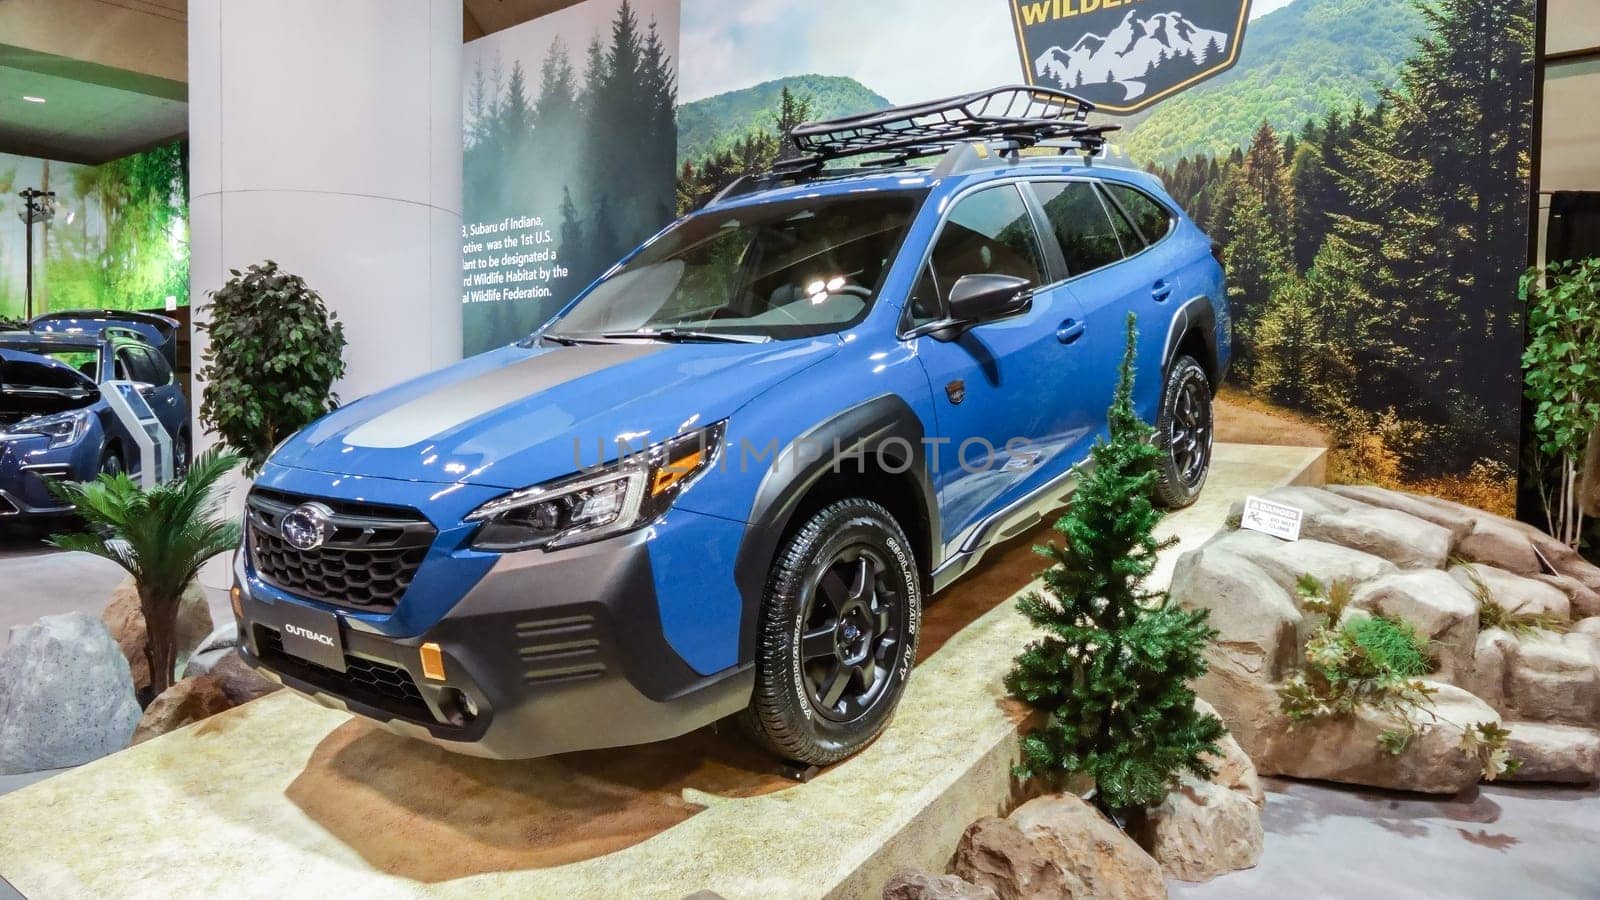 Crowds looking at new car models at Auto show. Subaru outback car on display. National Canadian Auto Show with many car brands. Toronto ON Canada Feb 19, 2023. by JuliaDorian